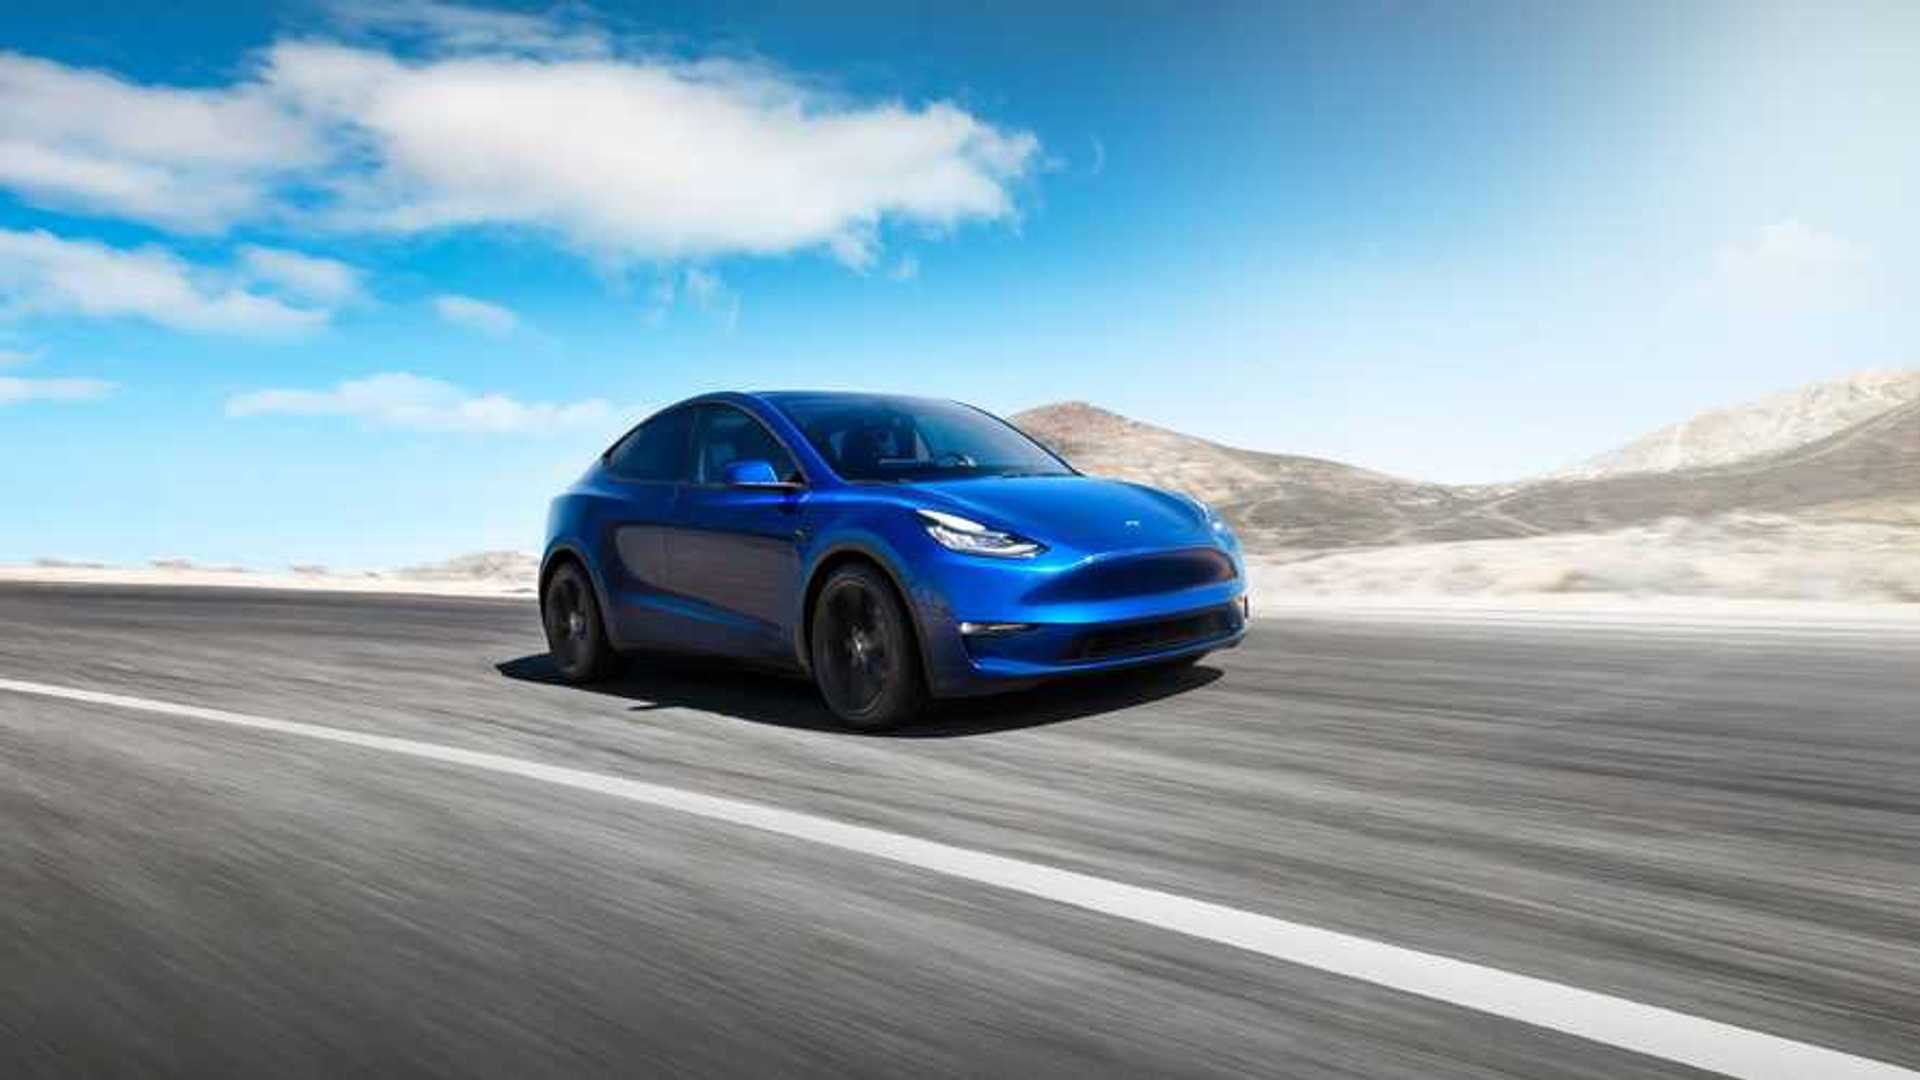 tesla discounts new cars in inventory—all models—by up to $6,300